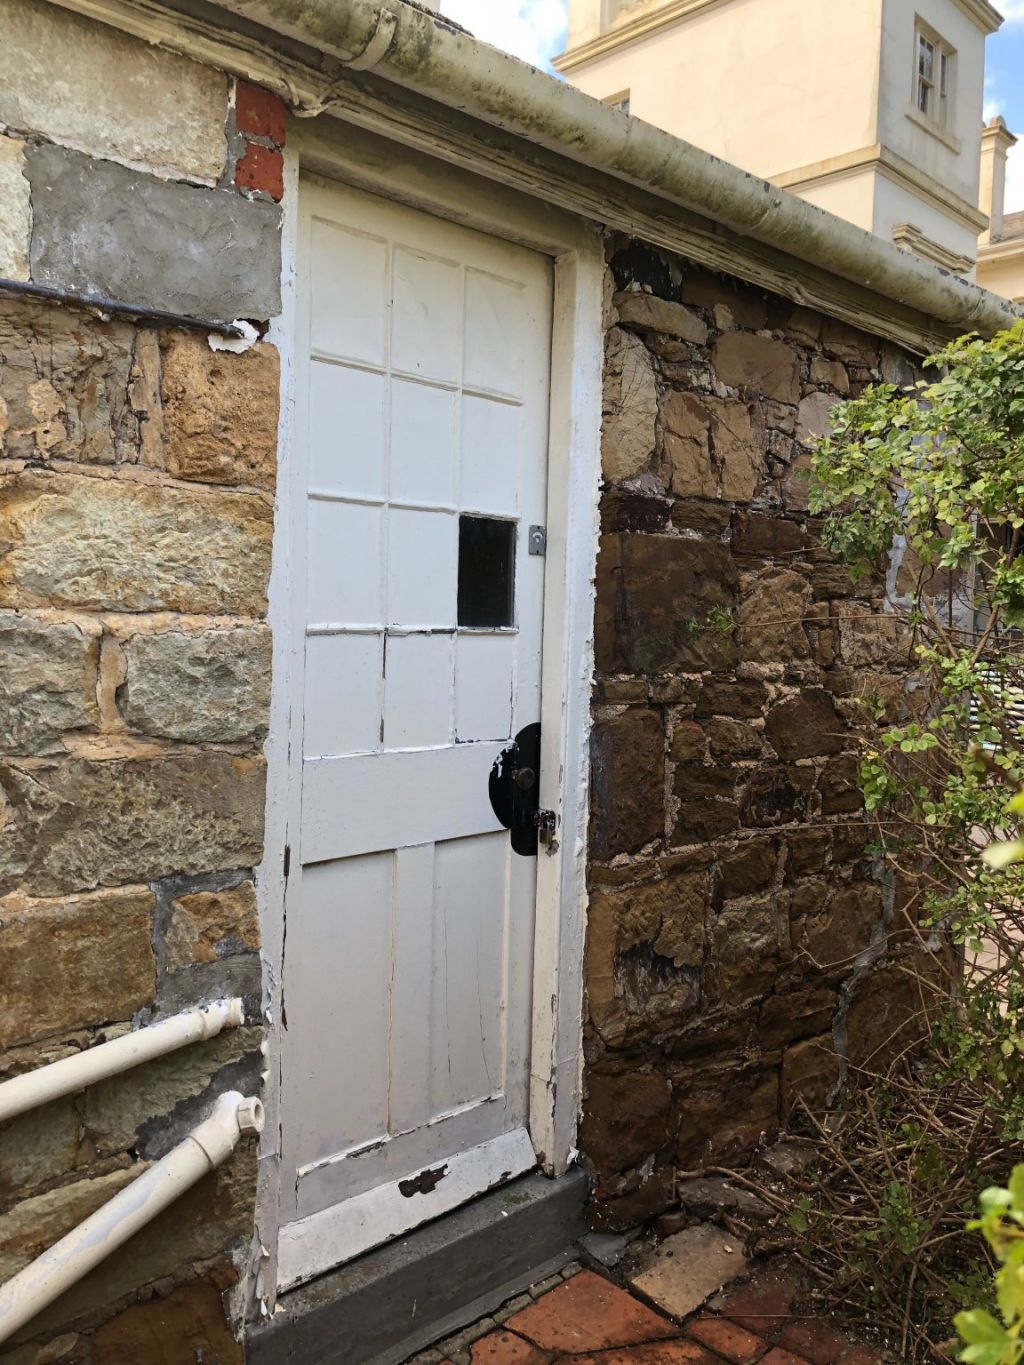 The original mudstone construction of the kitchen building has been revealed. Photo: National Trust Victoria